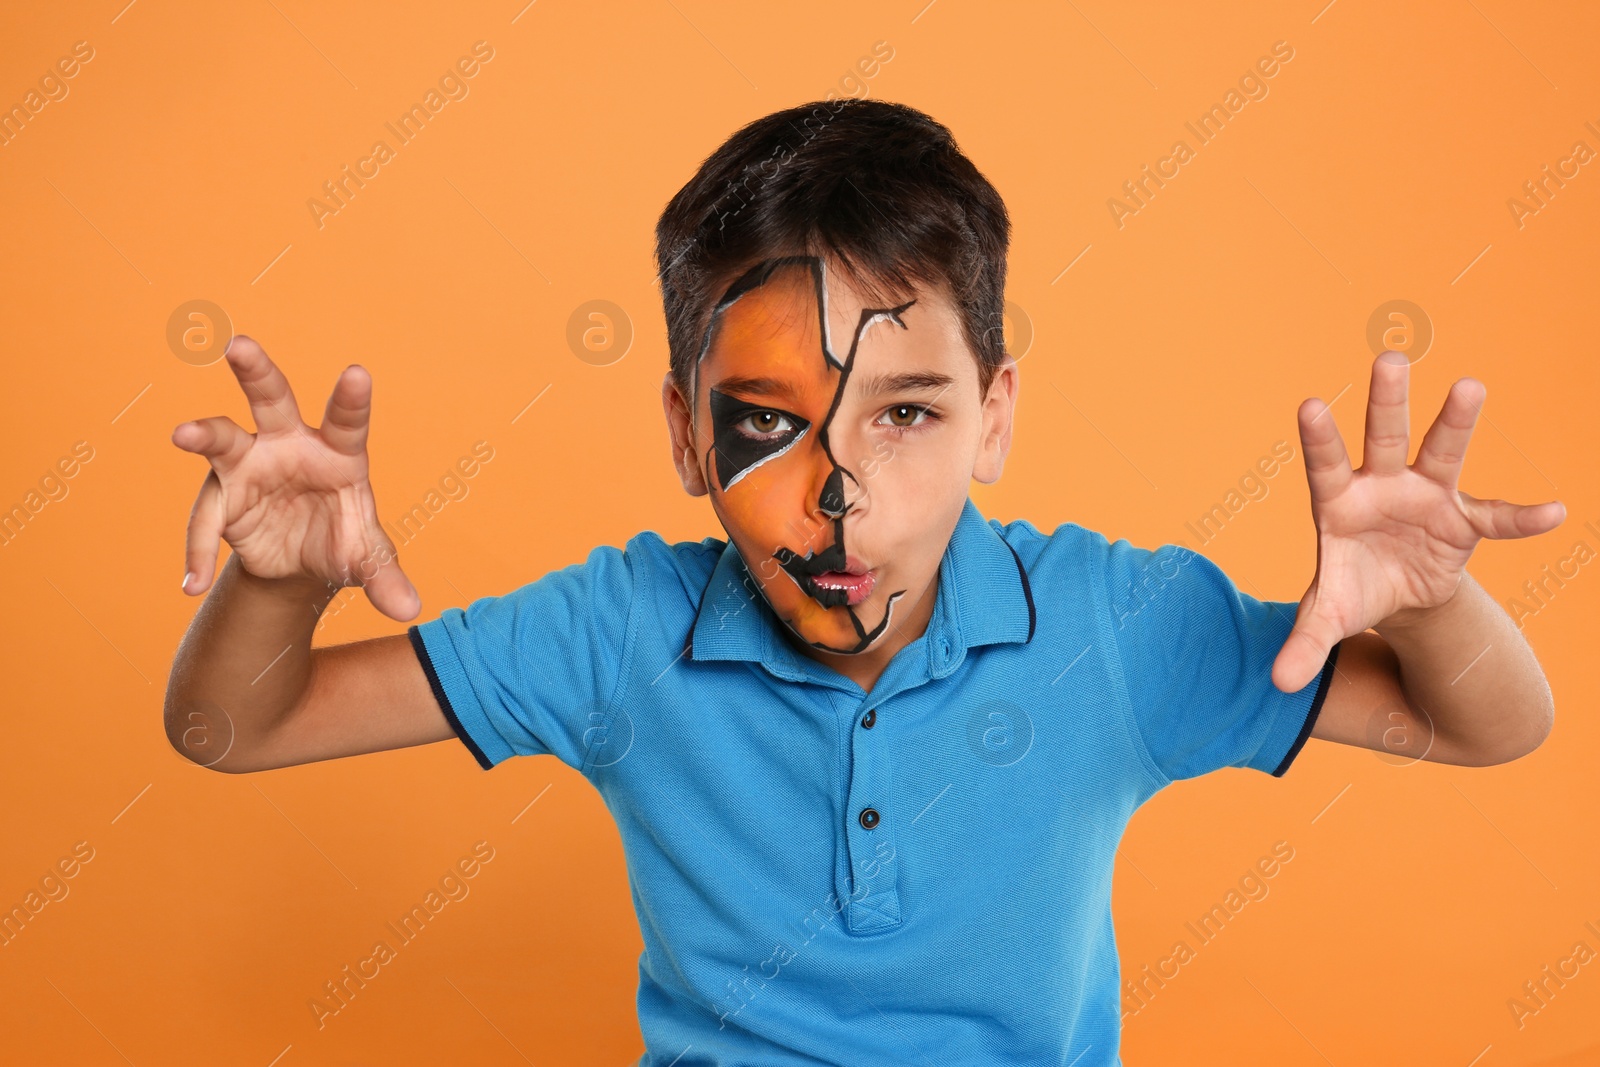 Photo of Cute little boy with face painting on orange background